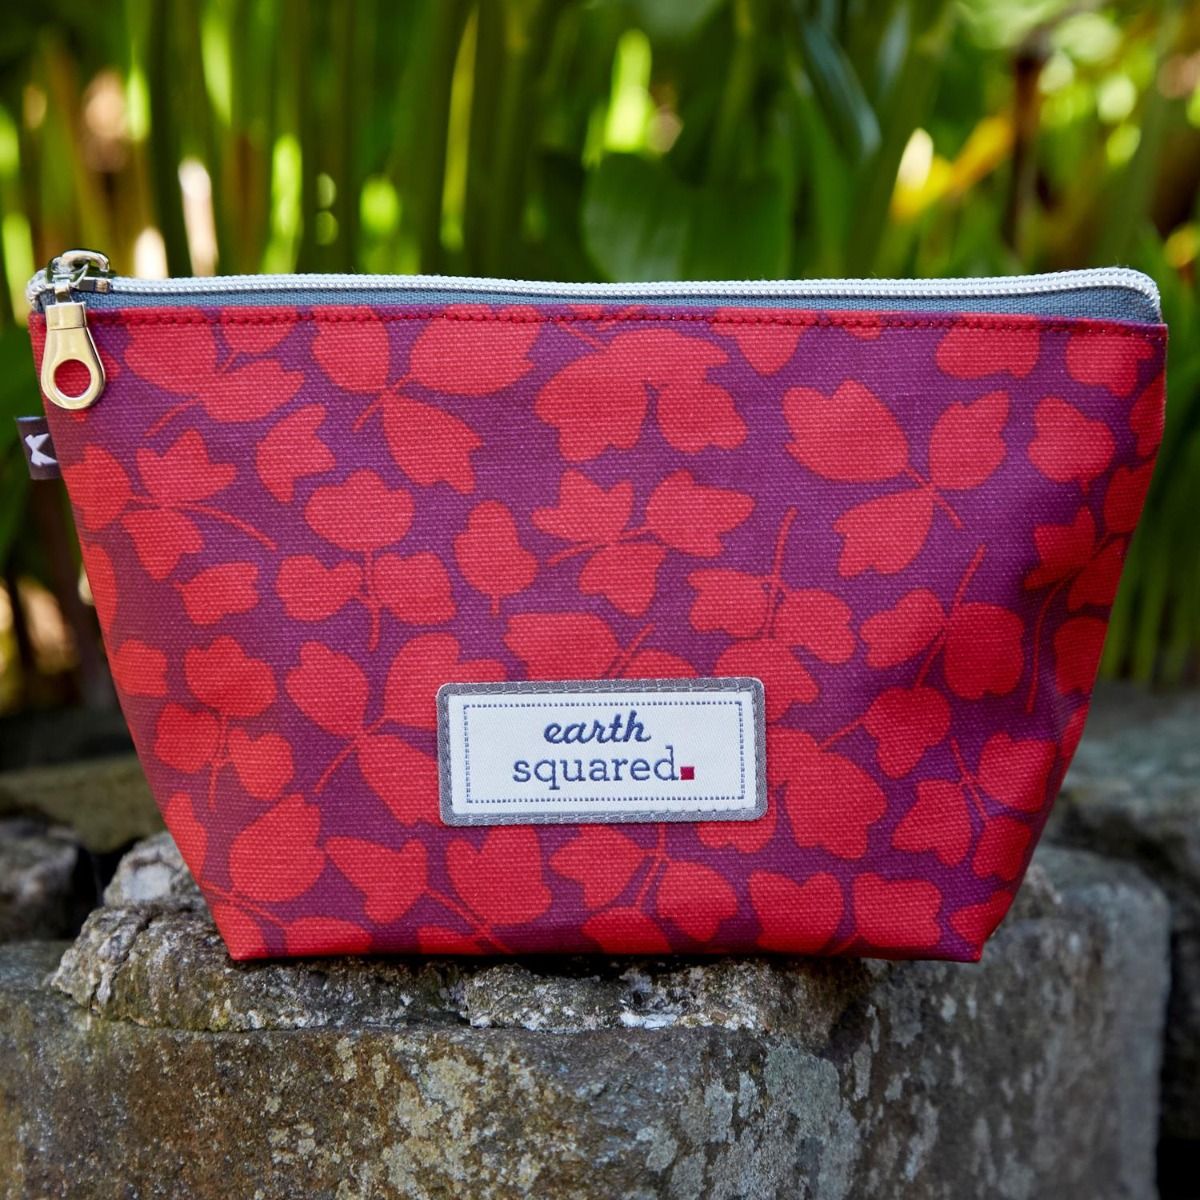 Oil Cloth Make Up Bag By Earth Squared